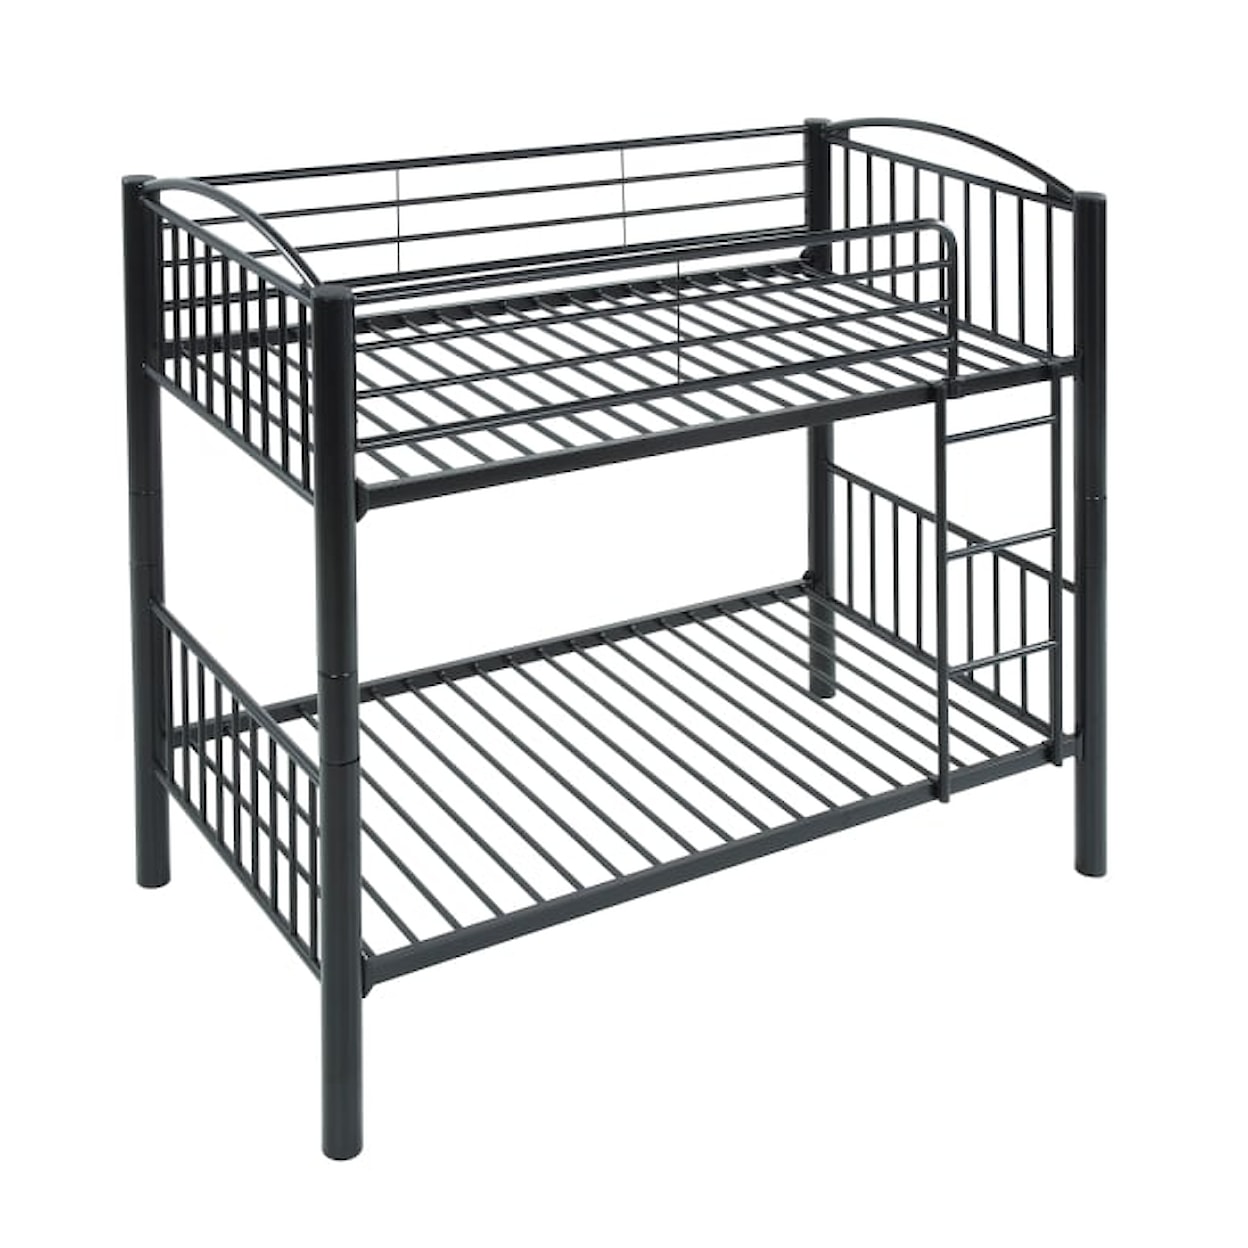 Homelegance Furniture Miscellaneous Twin Bunk Bed